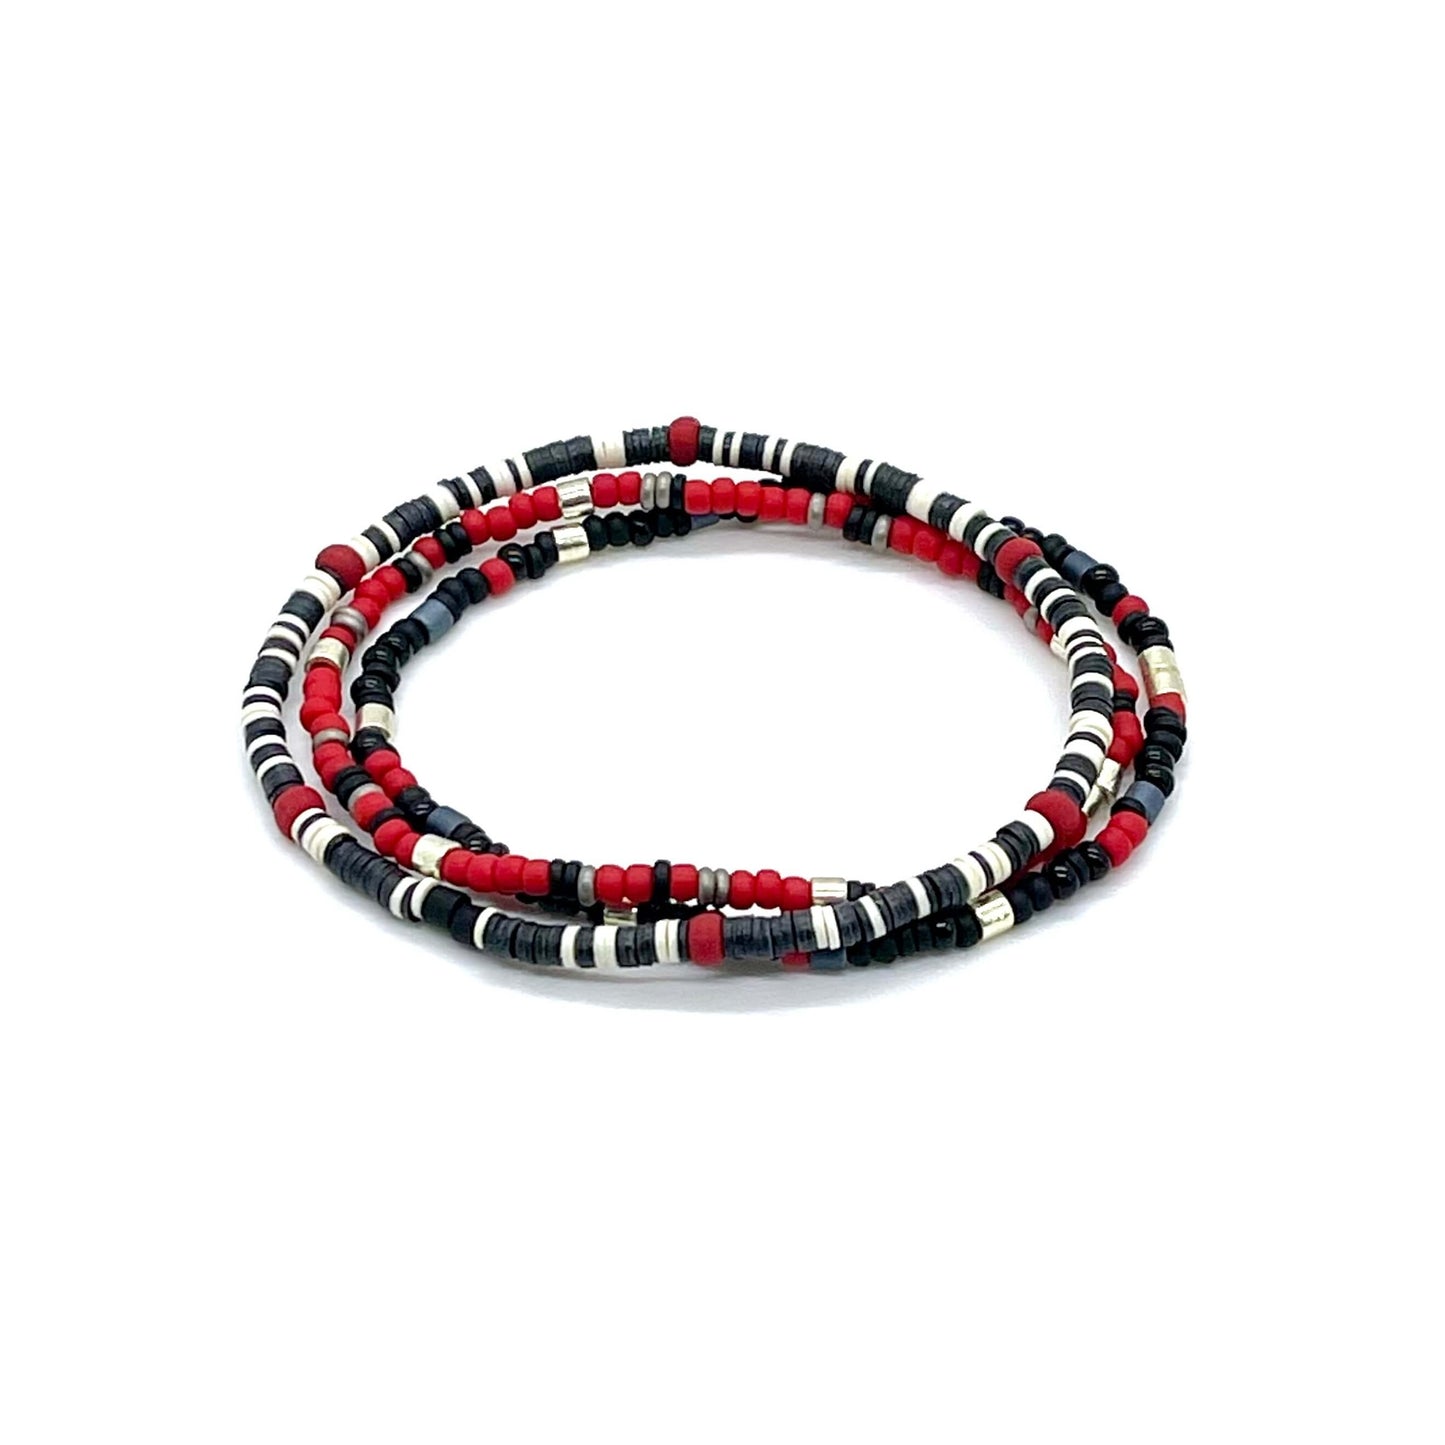 Men’s stackable beaded stretch bracelets with black & white vinyl Heishi disk beads, and red, black & silver seed beads.